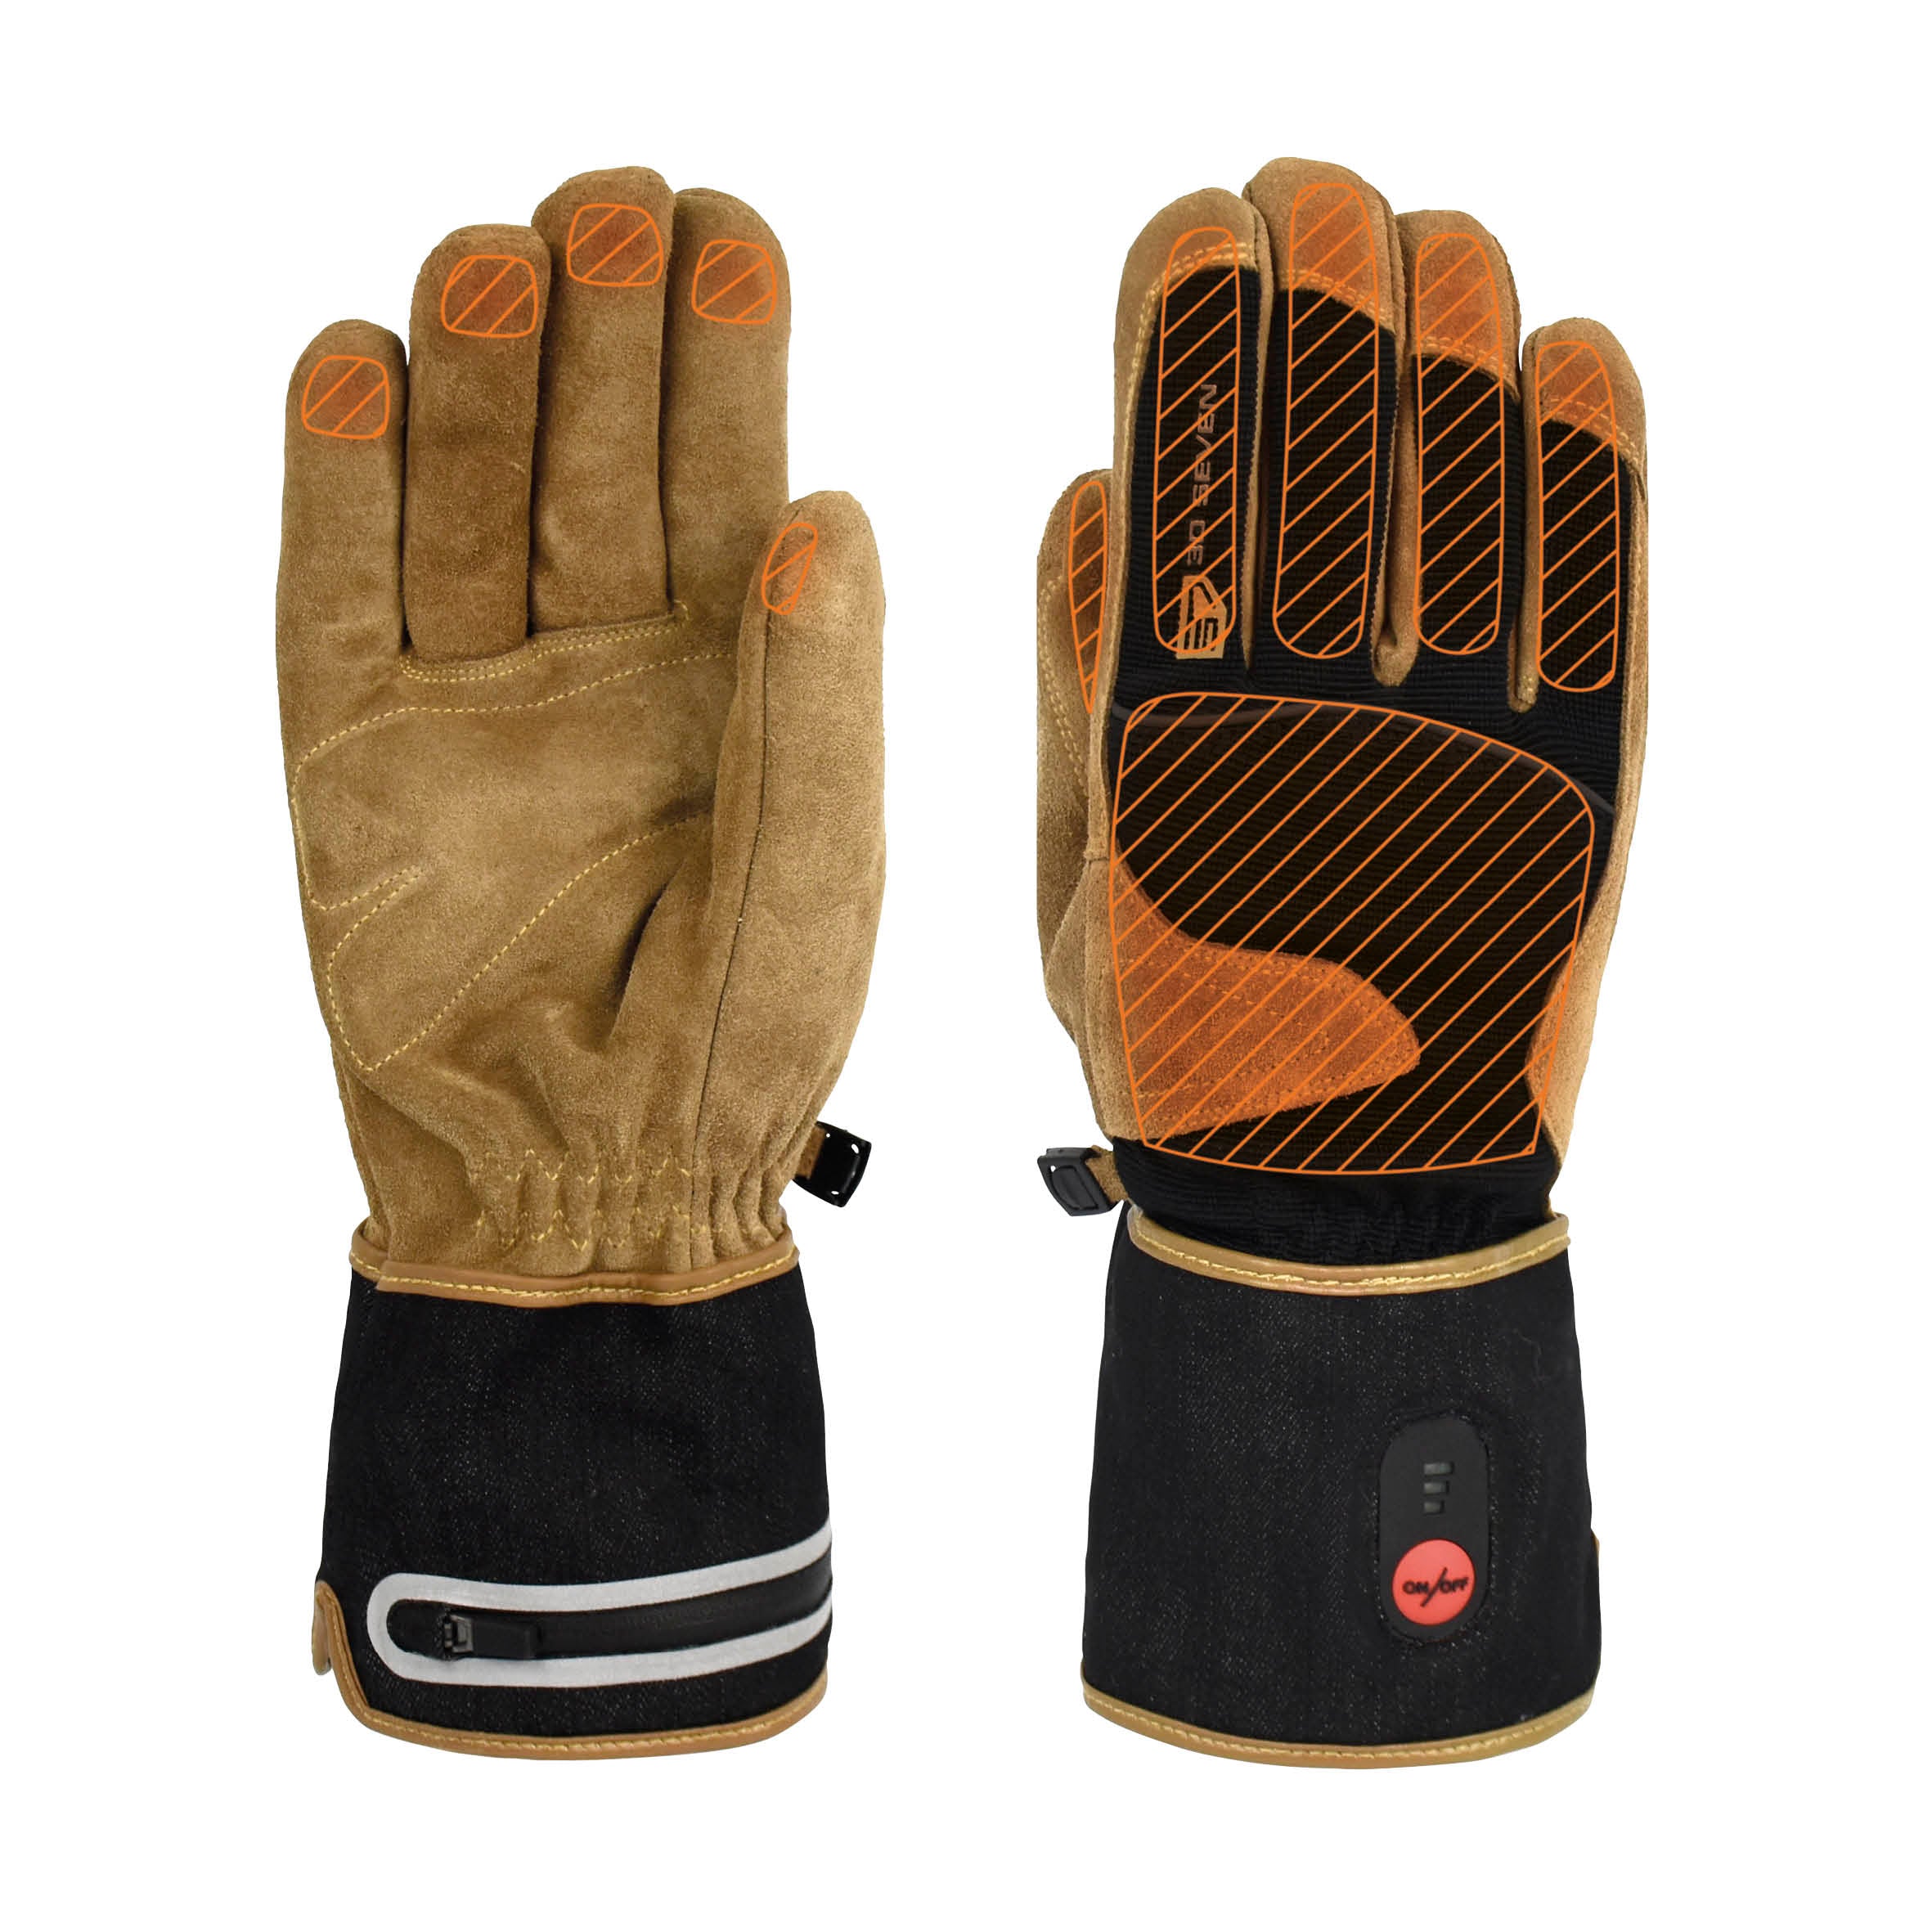 Winter Thermal Gloves Industrial Fishing Work Hard Warm Hand